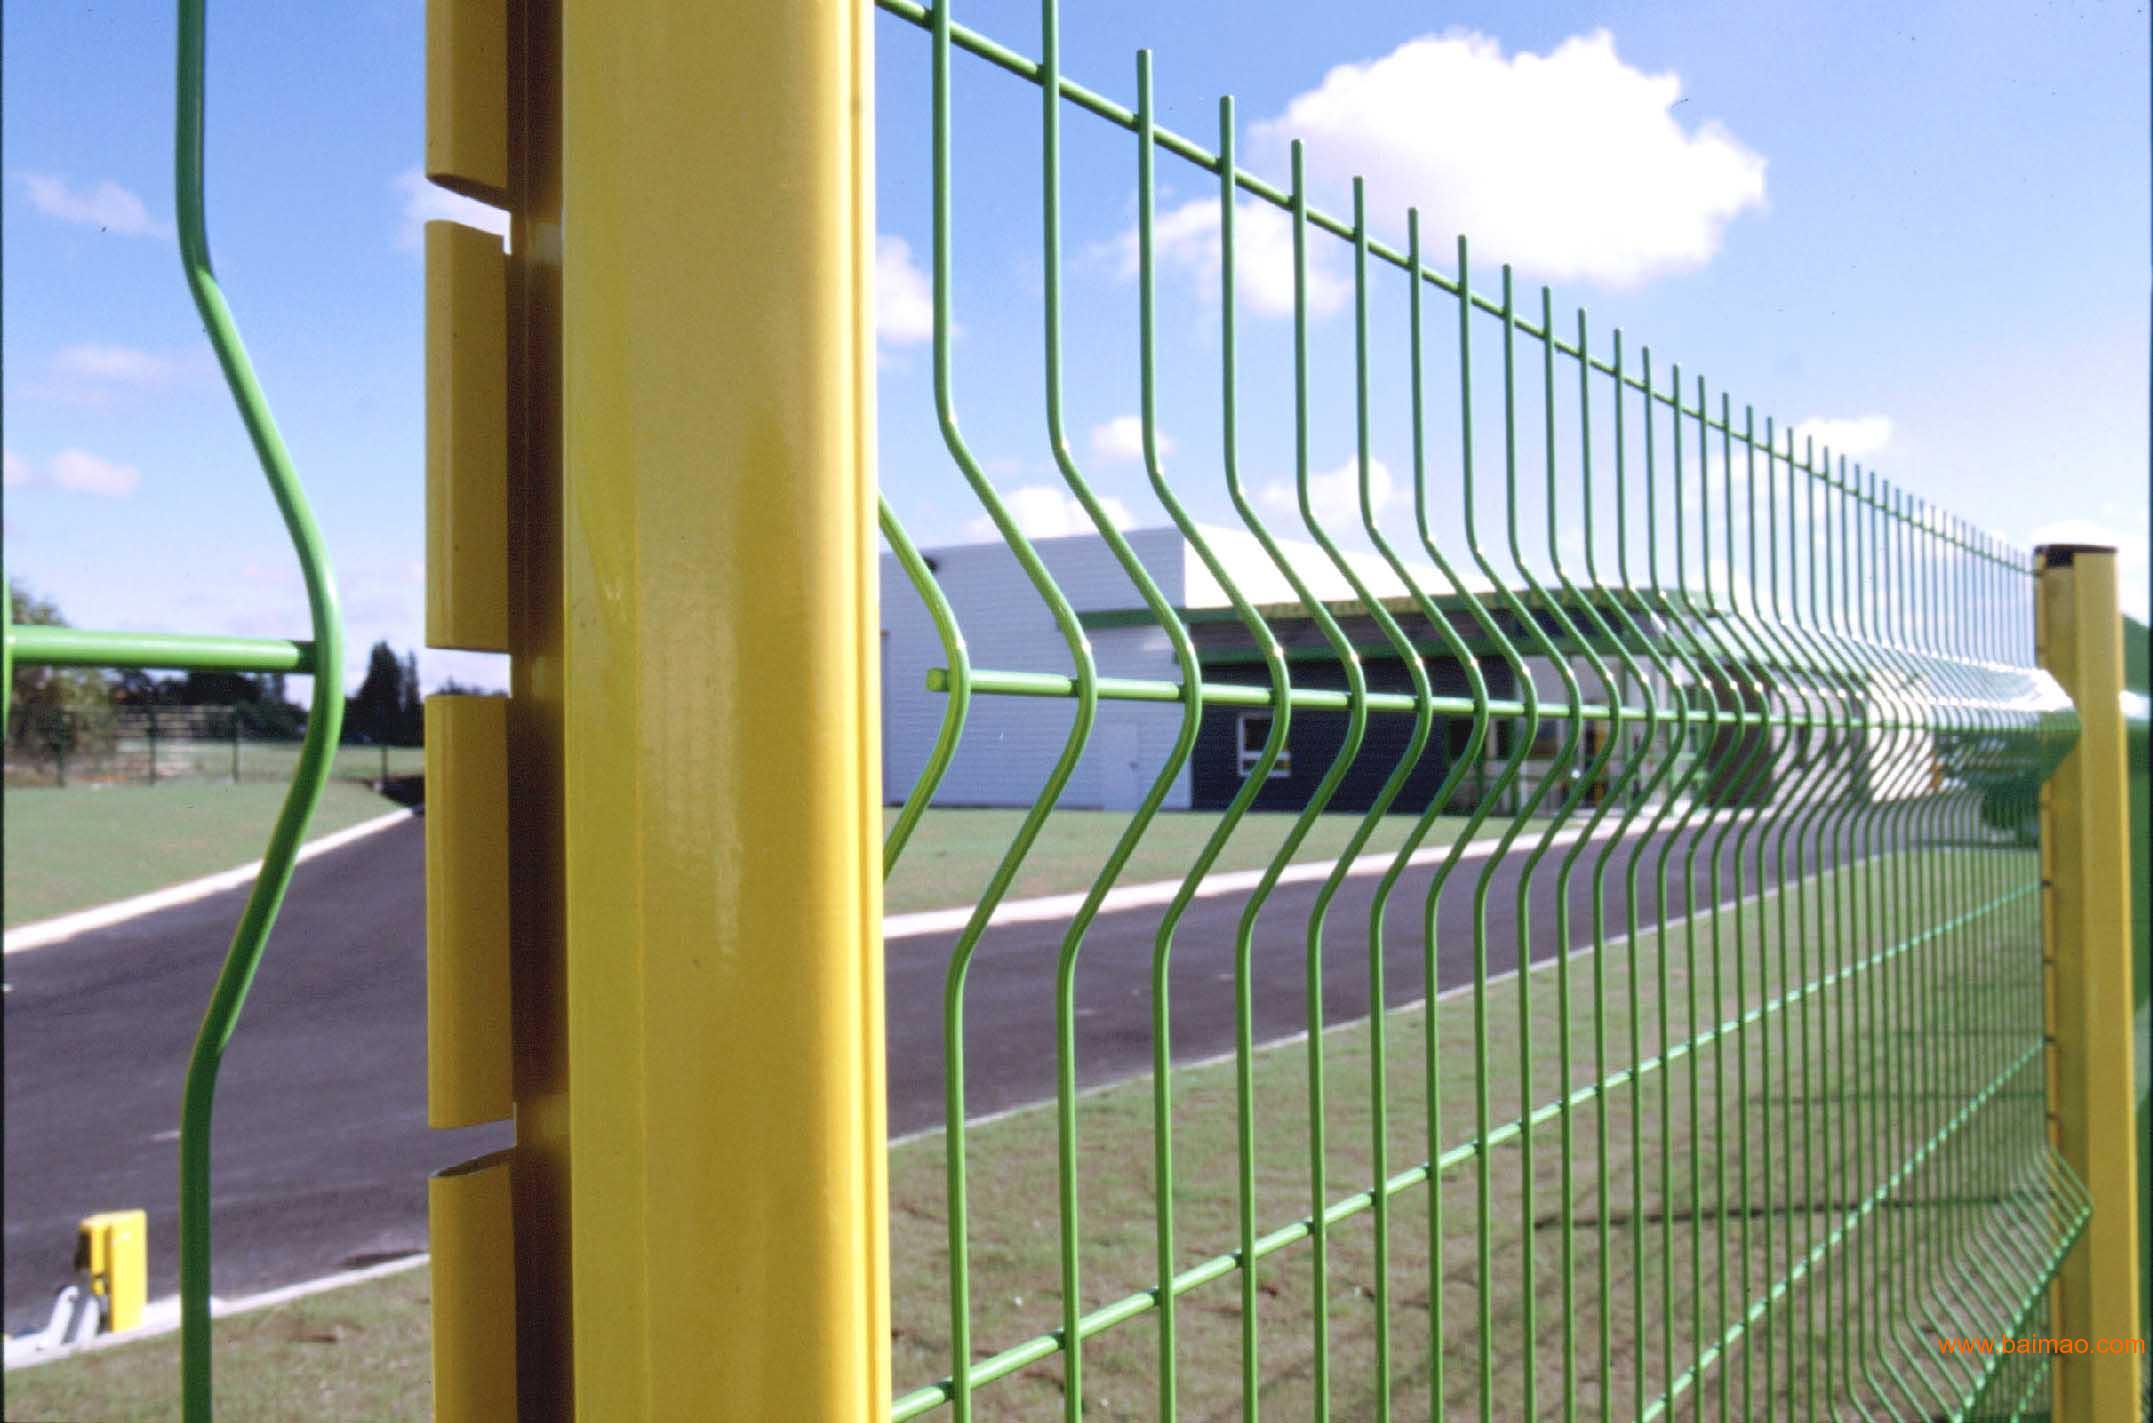 Classification Of High Security Fence.